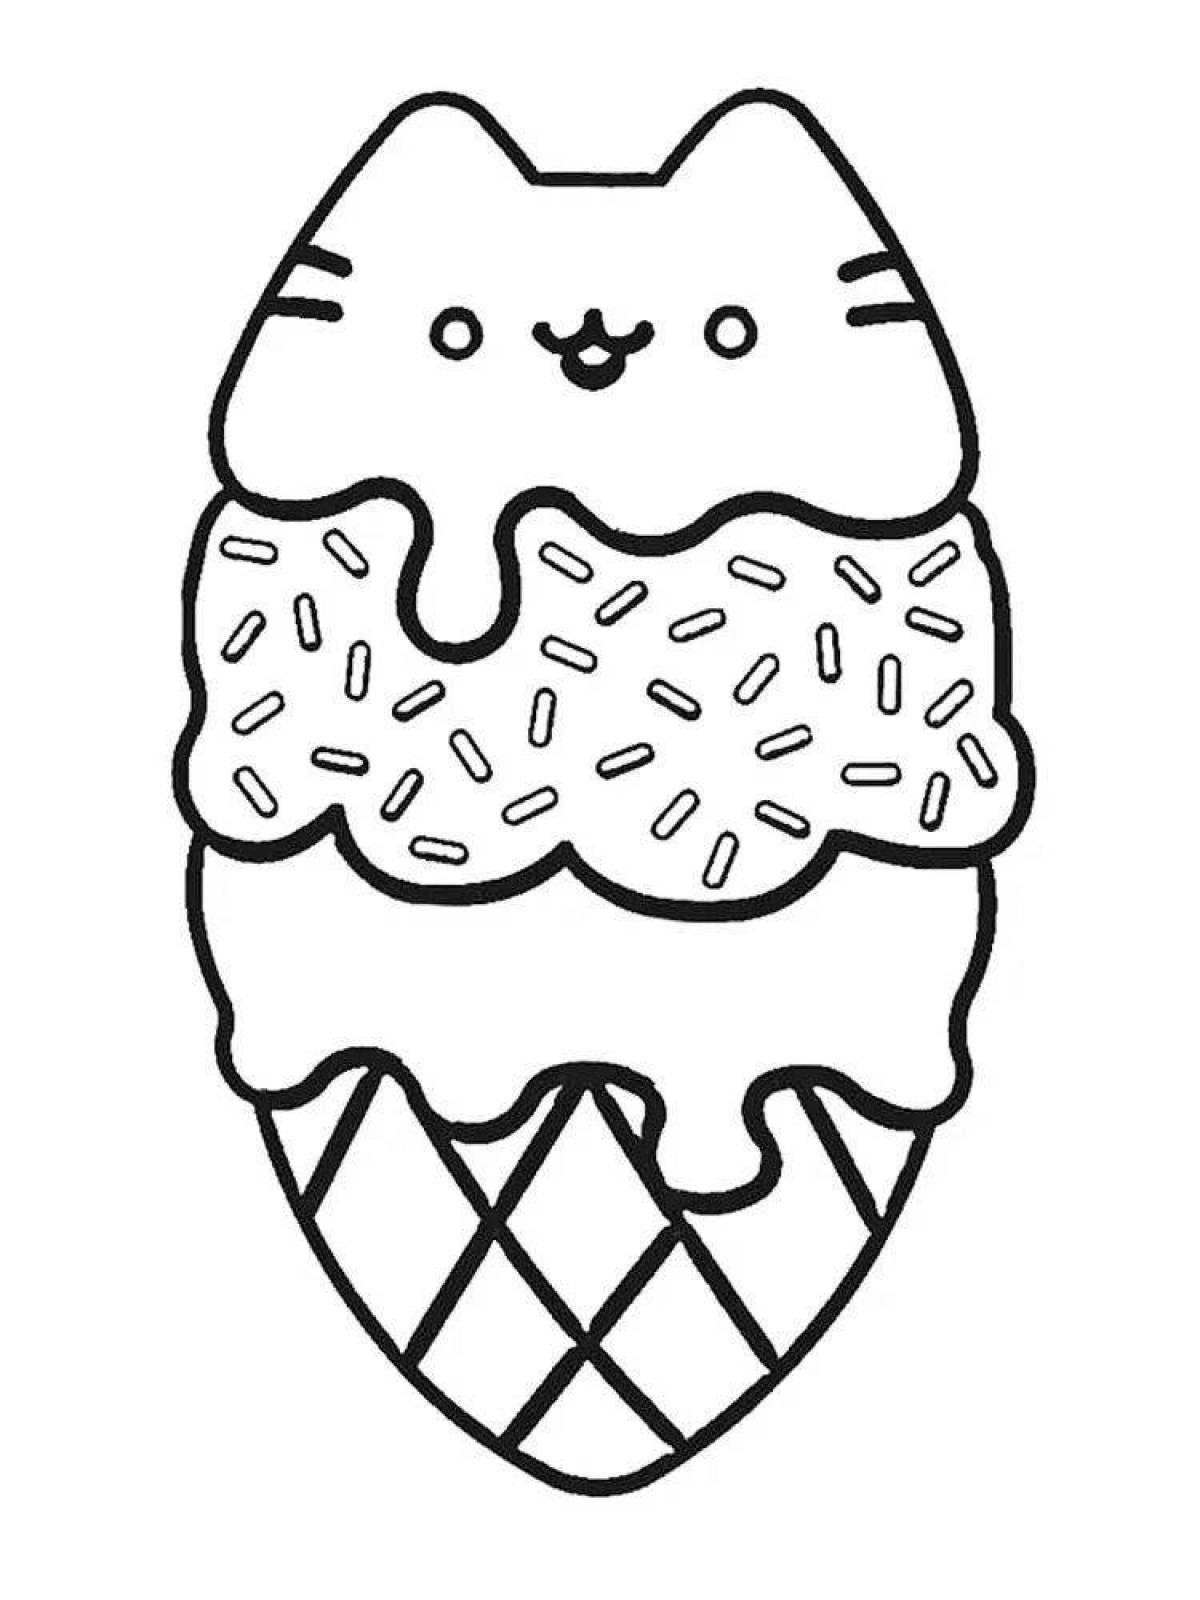 Coloring funky donut cat